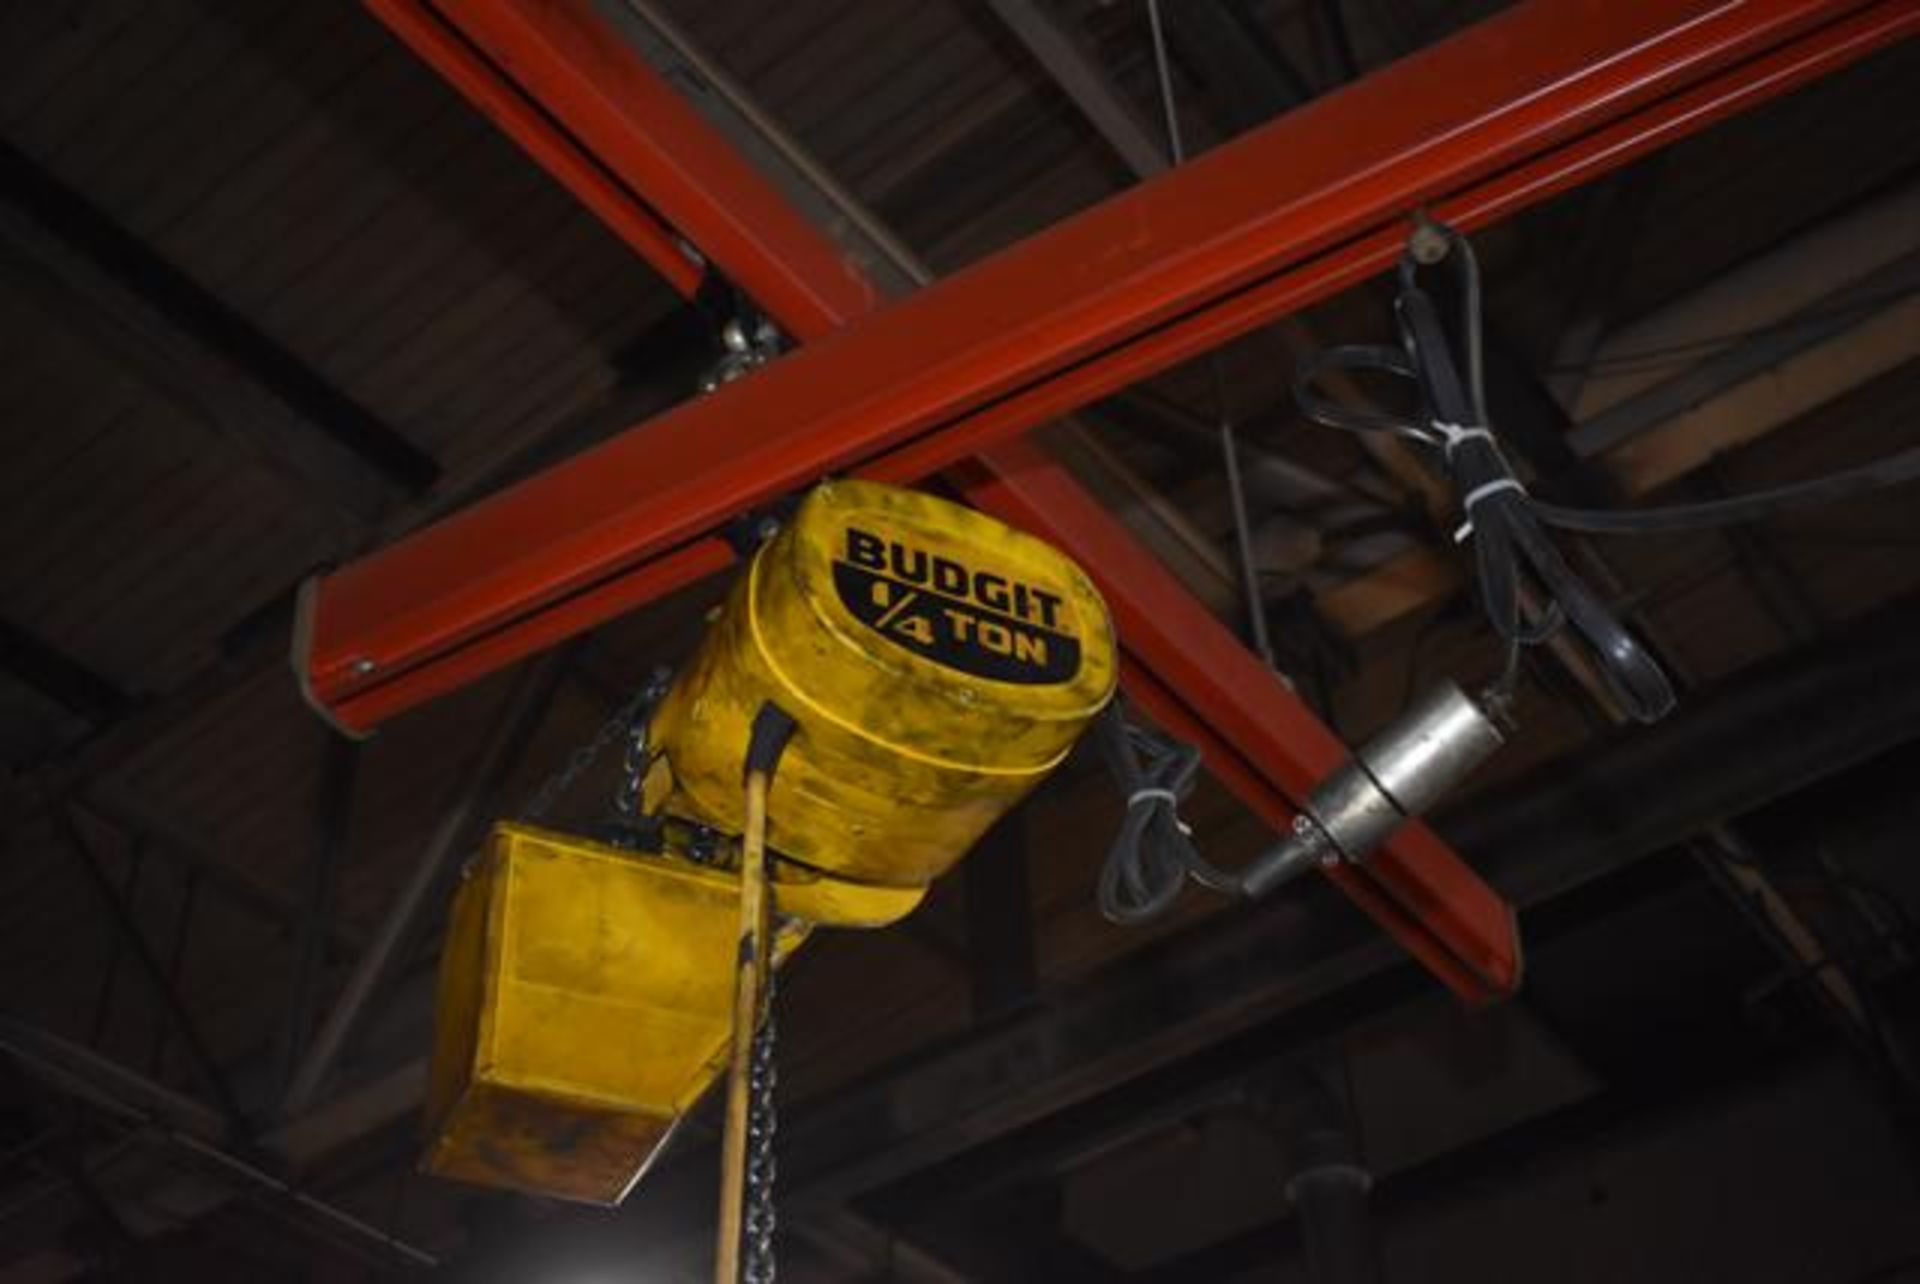 Demag Crane System, Approx. 12' x 12' Floor Space w/Budgit 1/4 Ton Electric Chain Hoist - Image 2 of 2